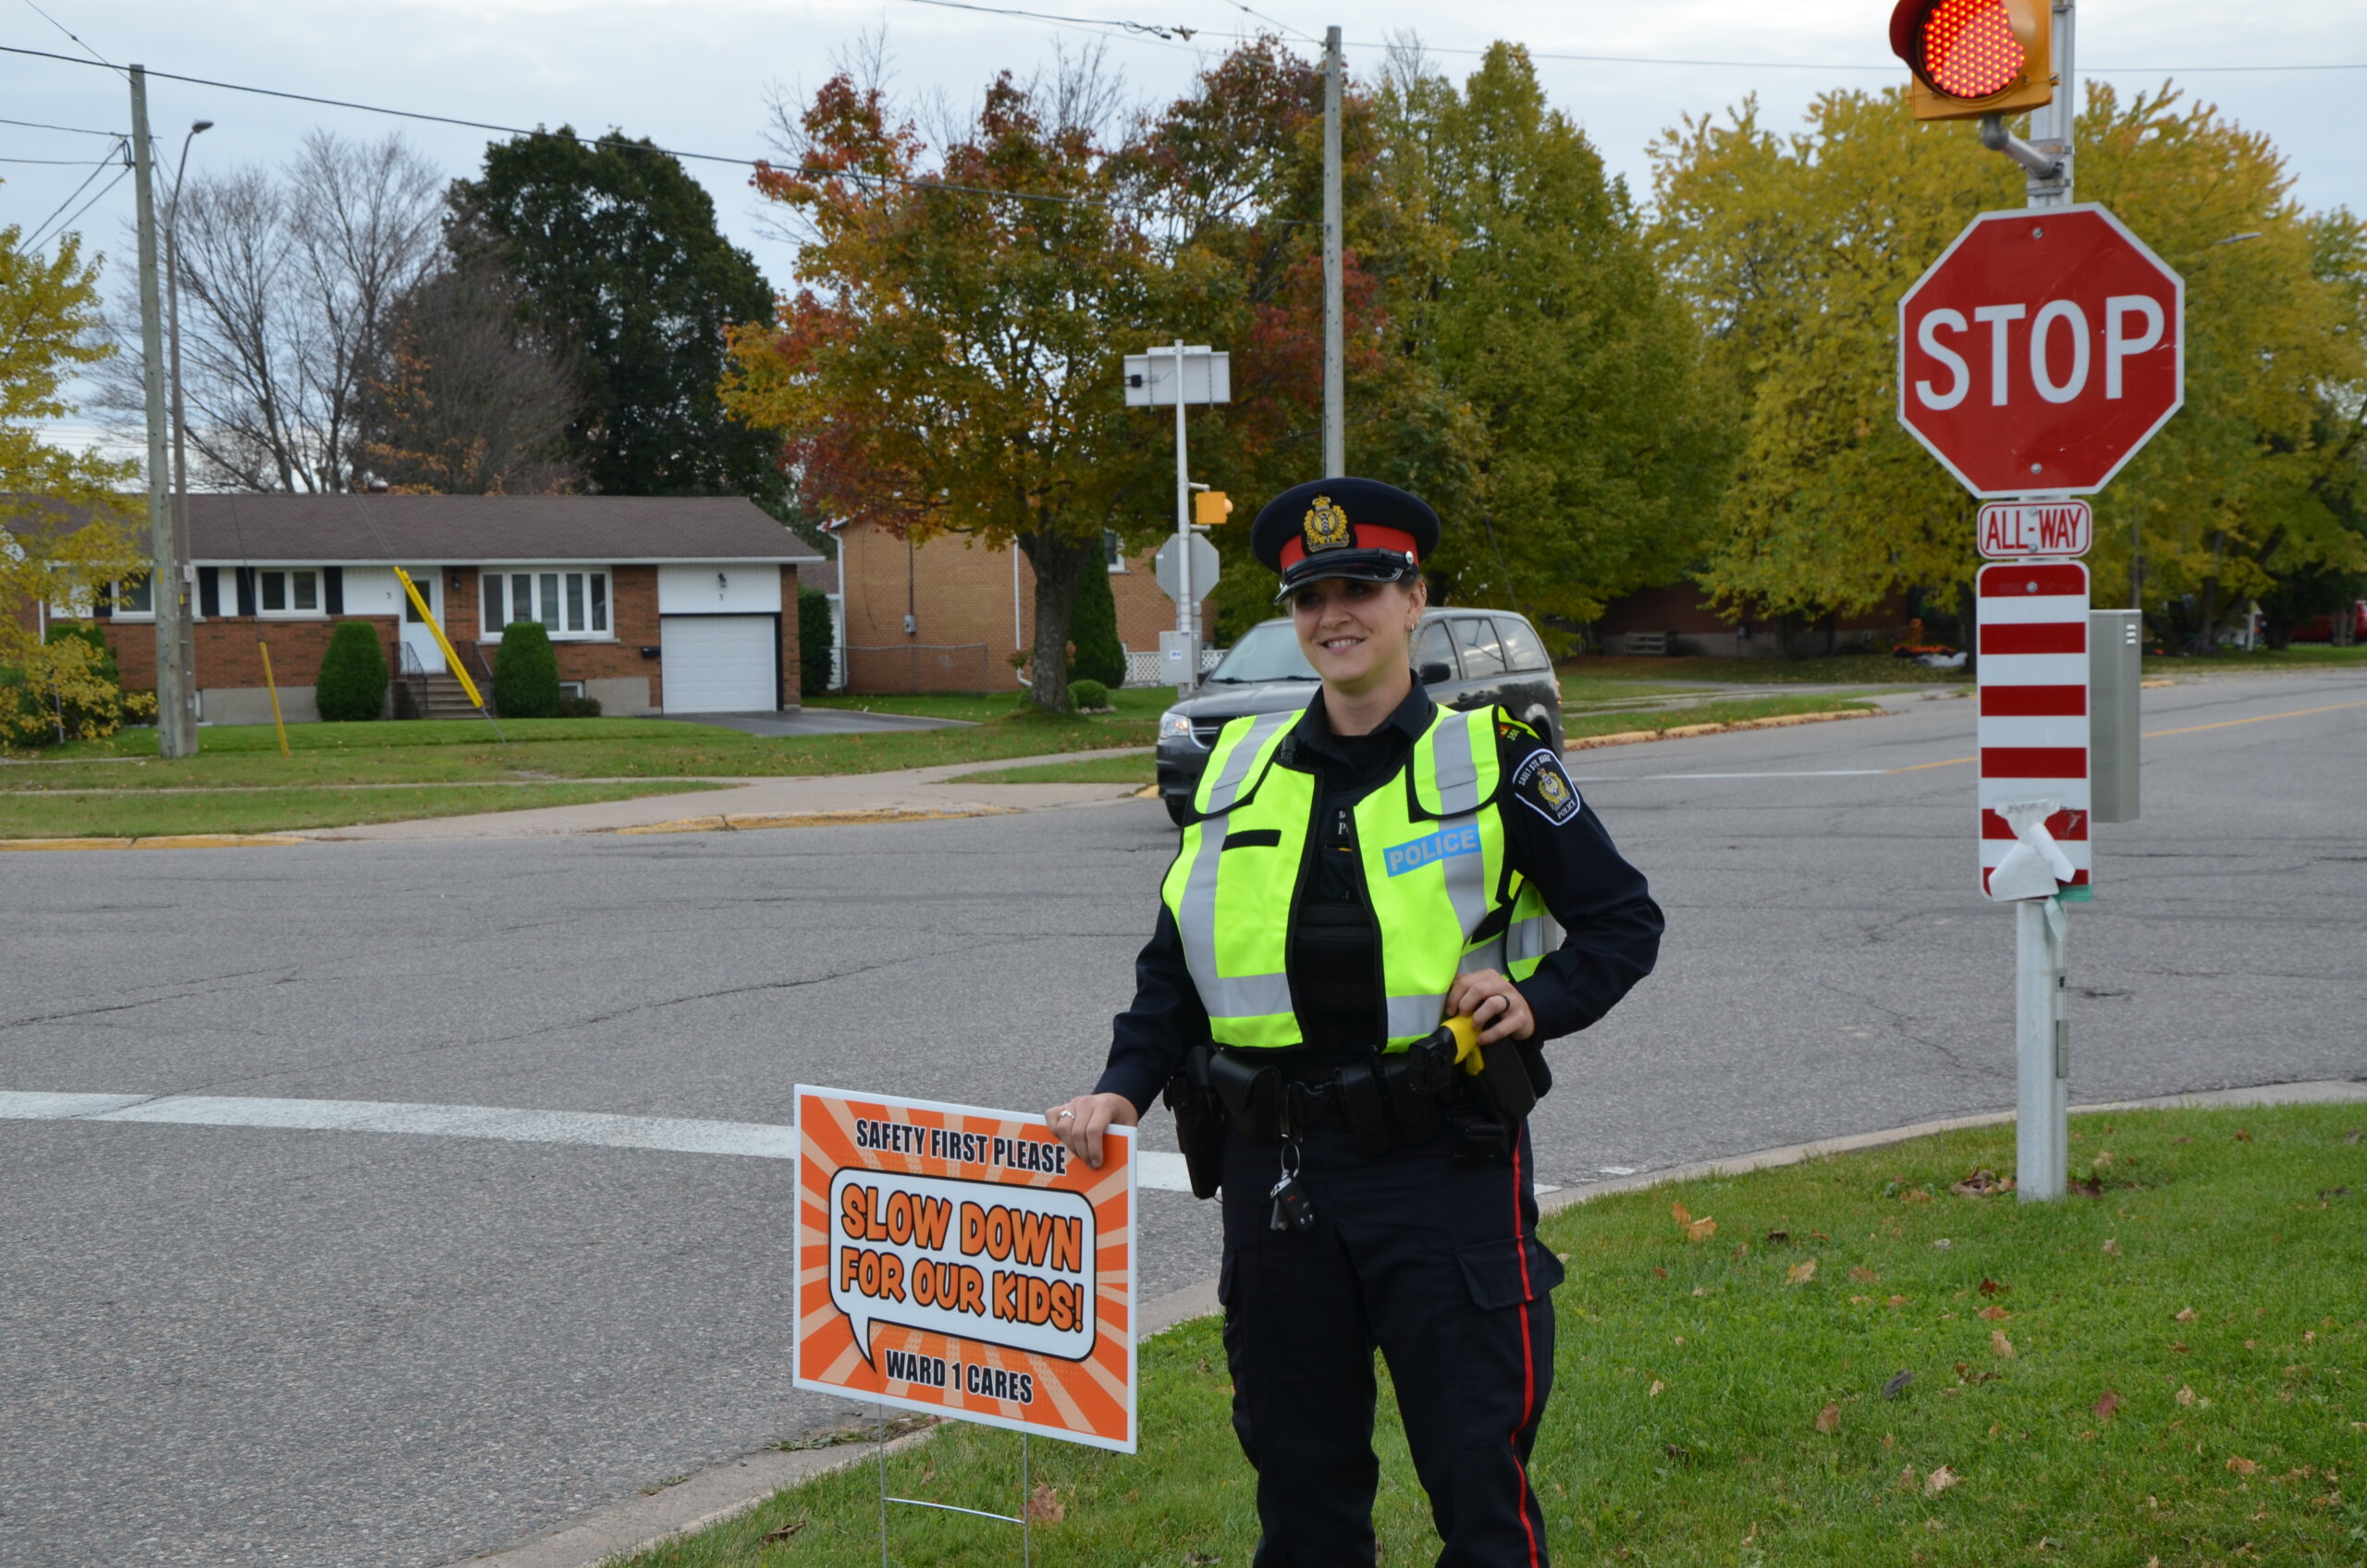 Officer with slow down sign